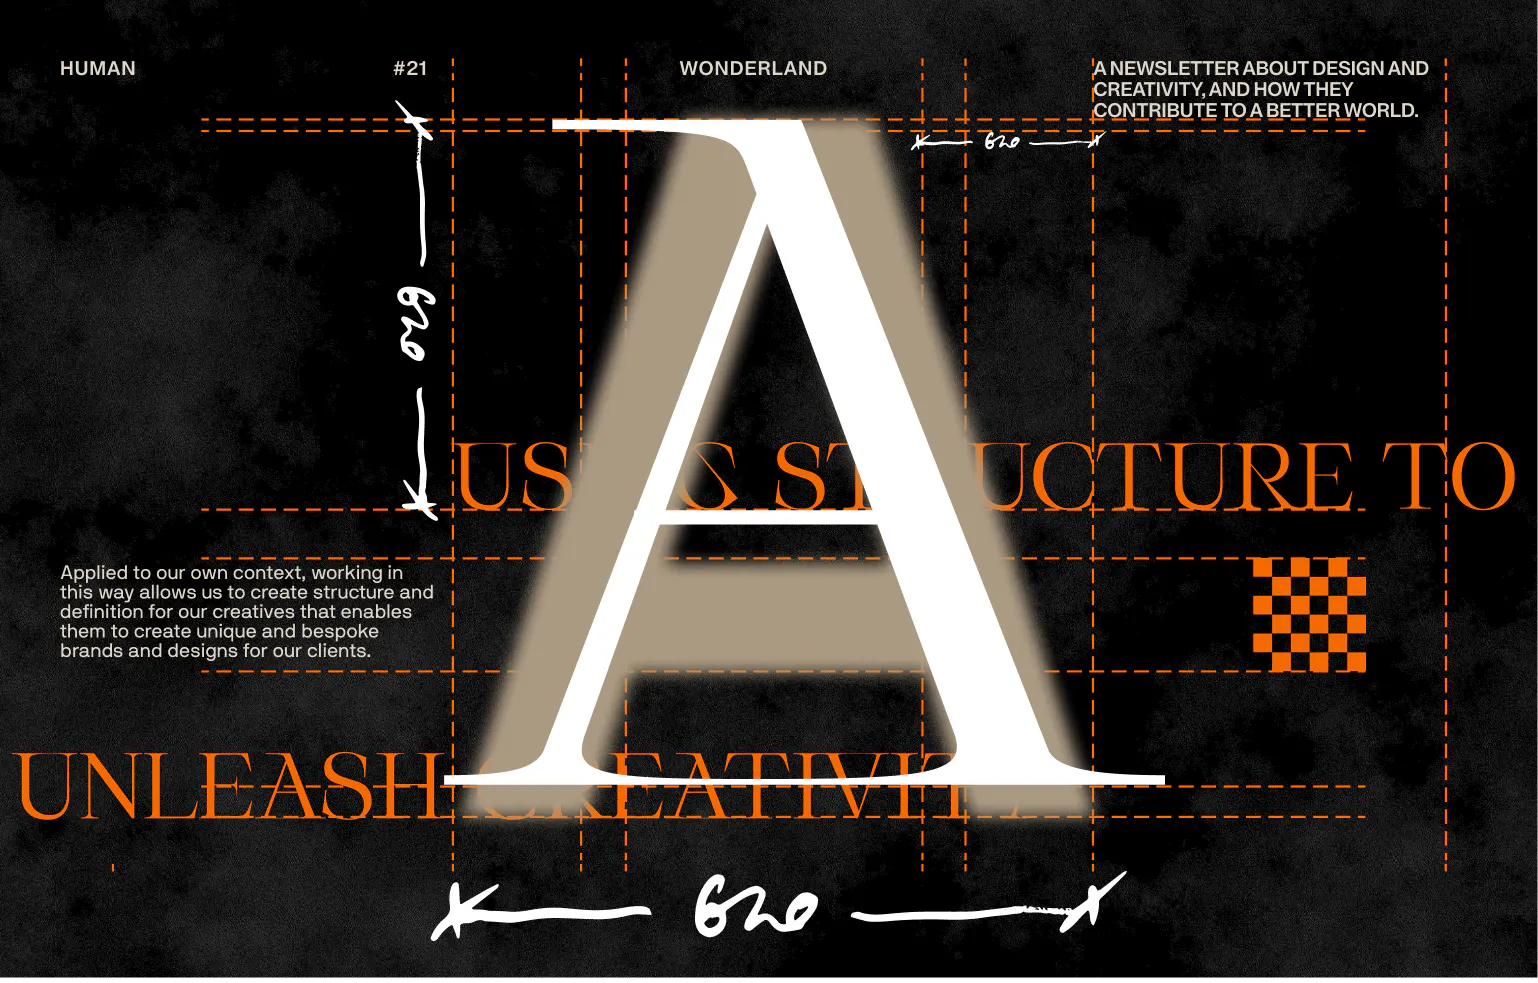 Letter 'A' in white against black background - Using Structure to Unleash Creativity (Idea Page)